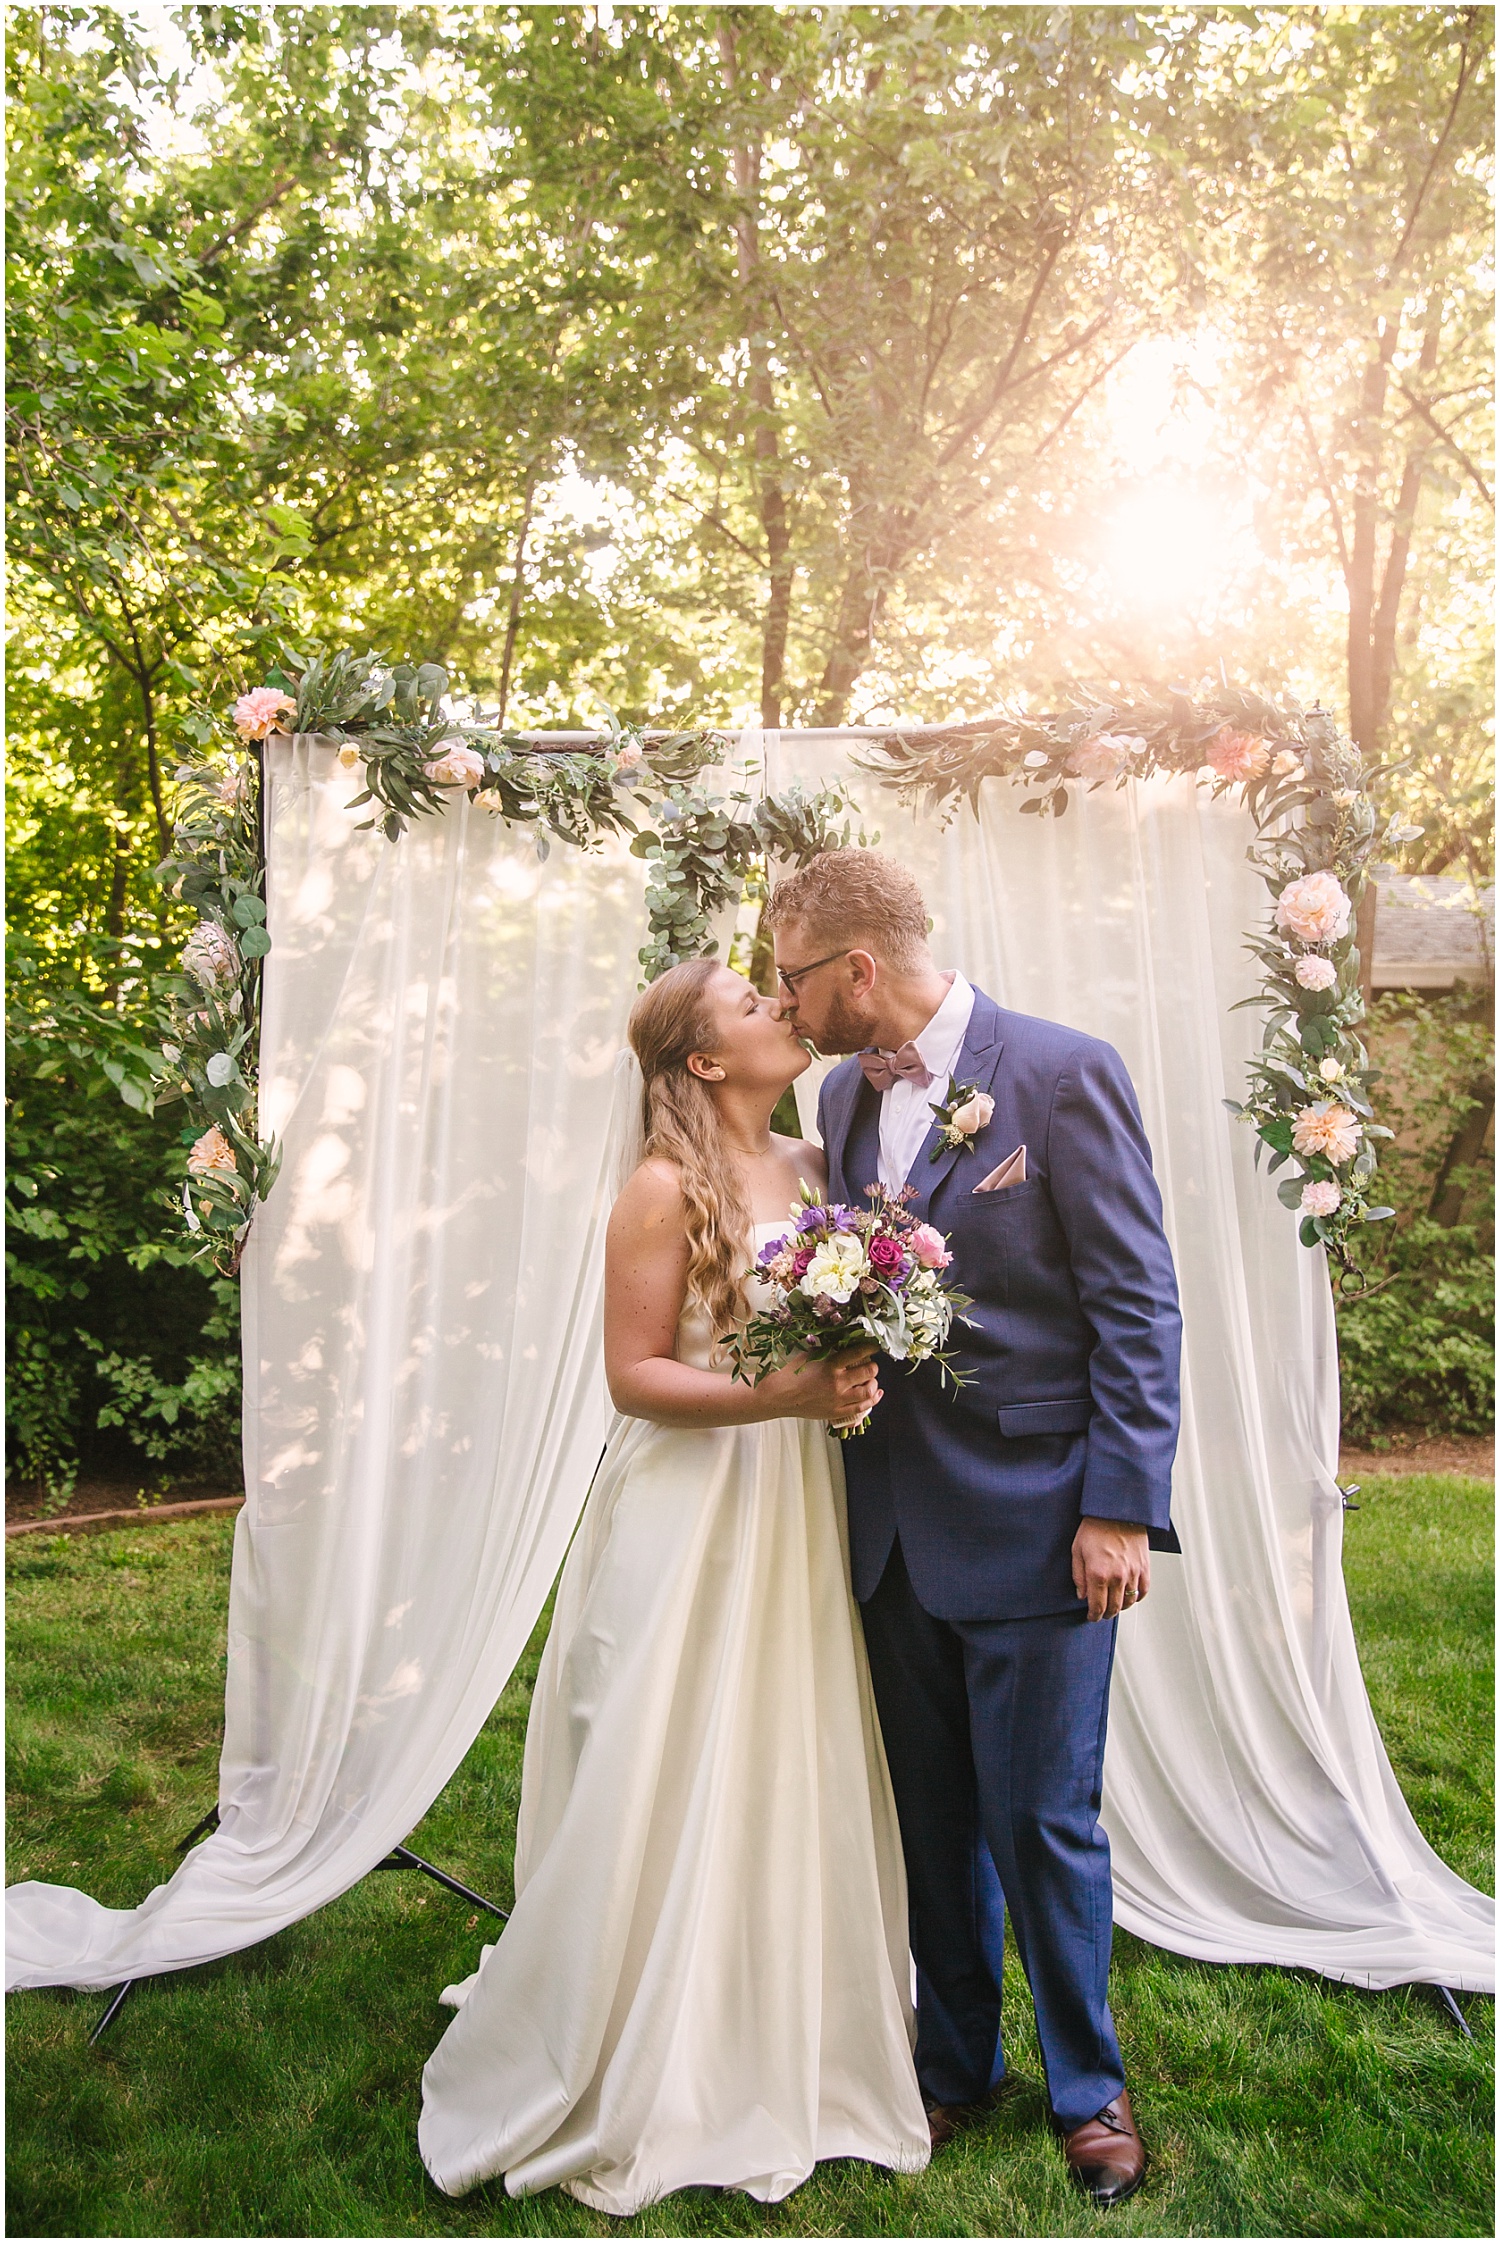 Bride and groom kissing at golden hour surrounded by lush greenery